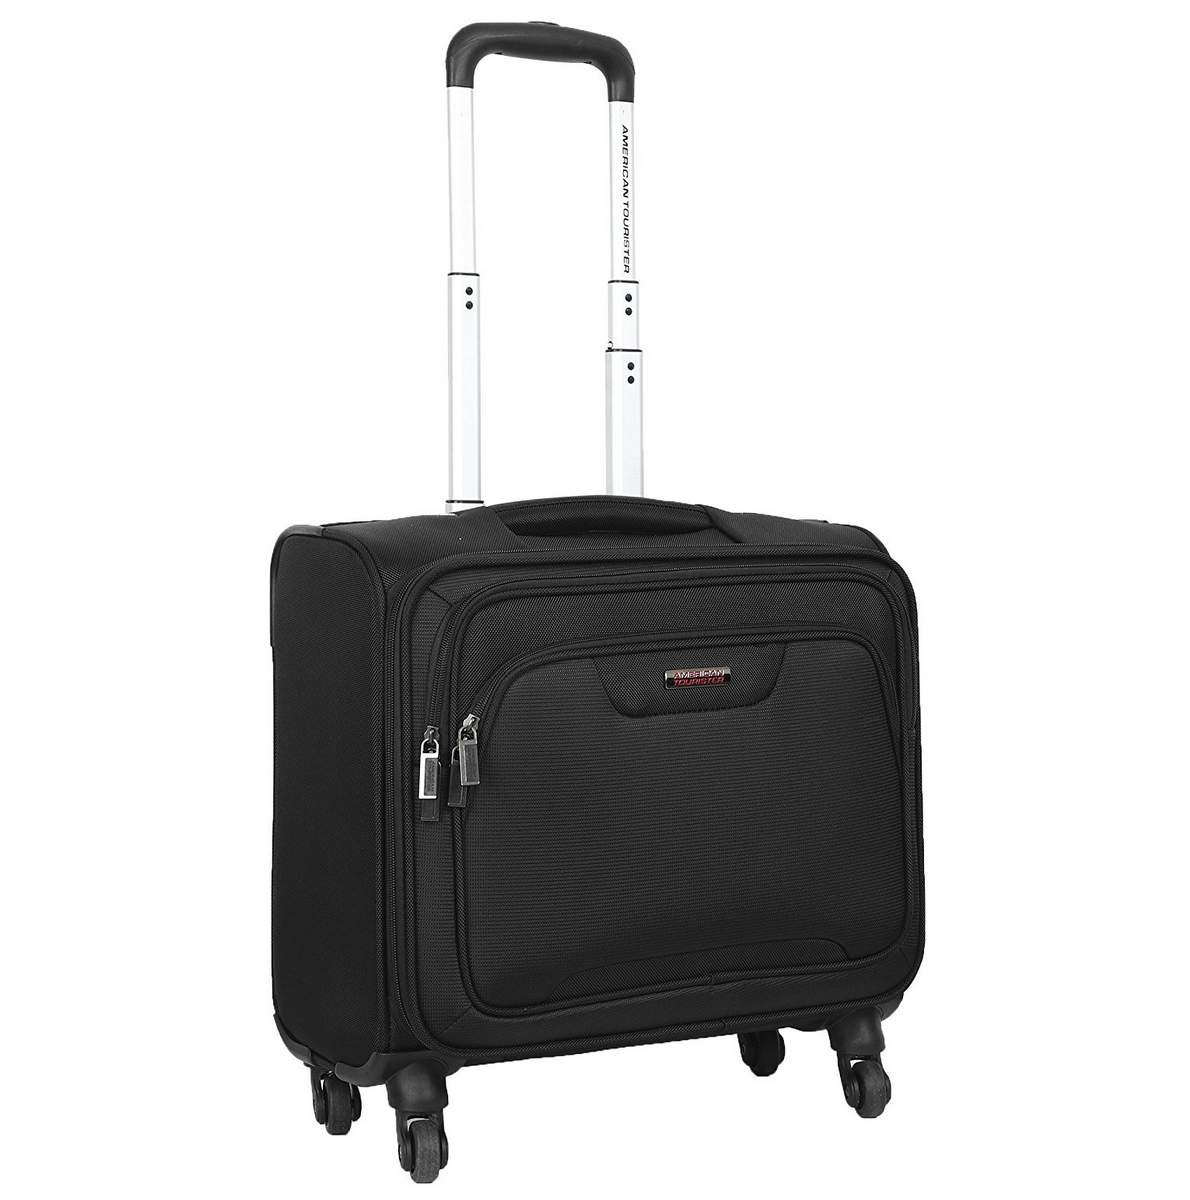 American Tourister Clark Overnighter Laptop Rolling Tote Travel Bag ...